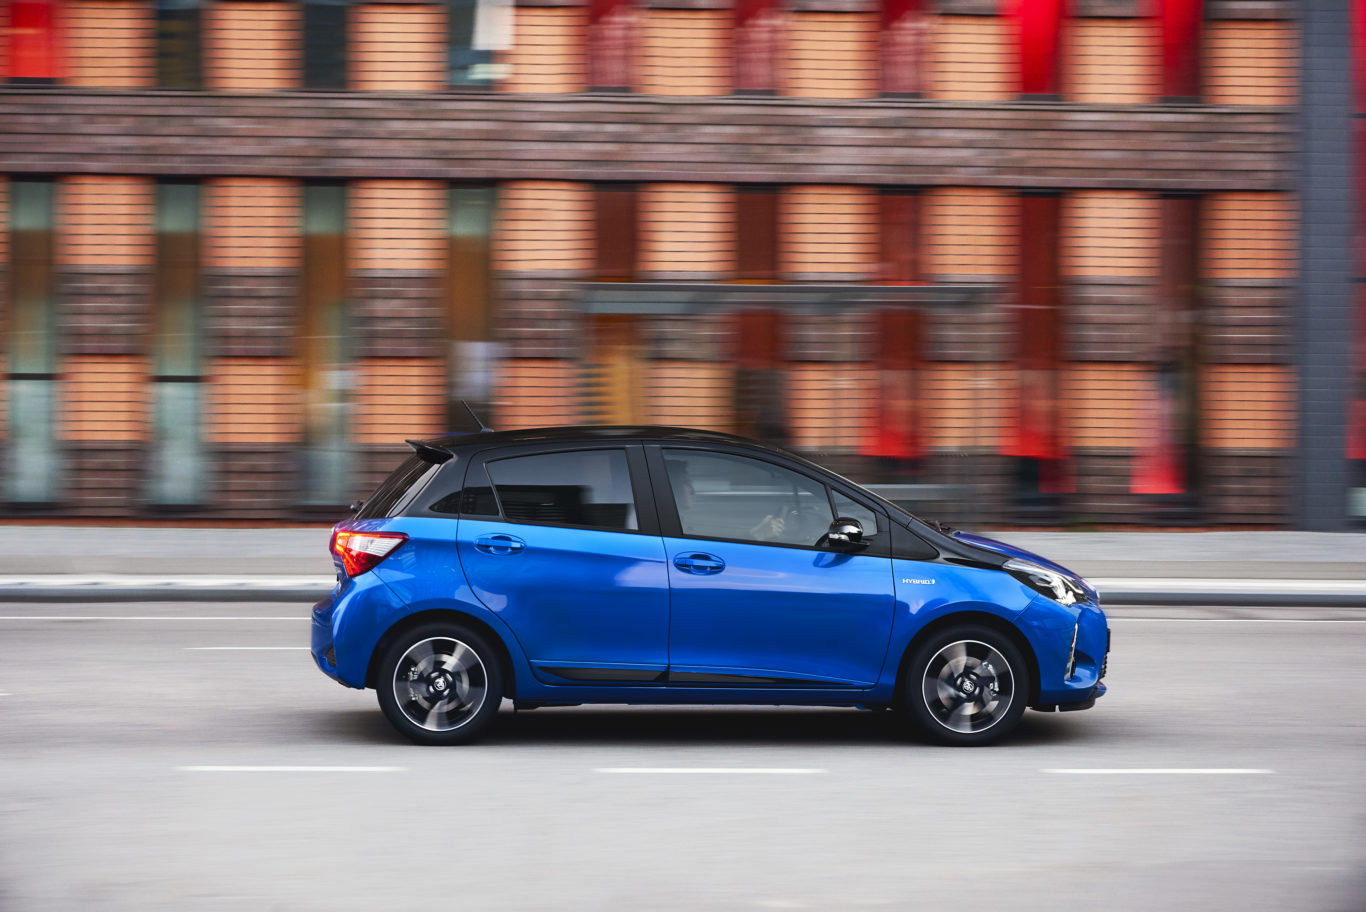 The Yaris' compact dimensions make it ideal for urban drivers